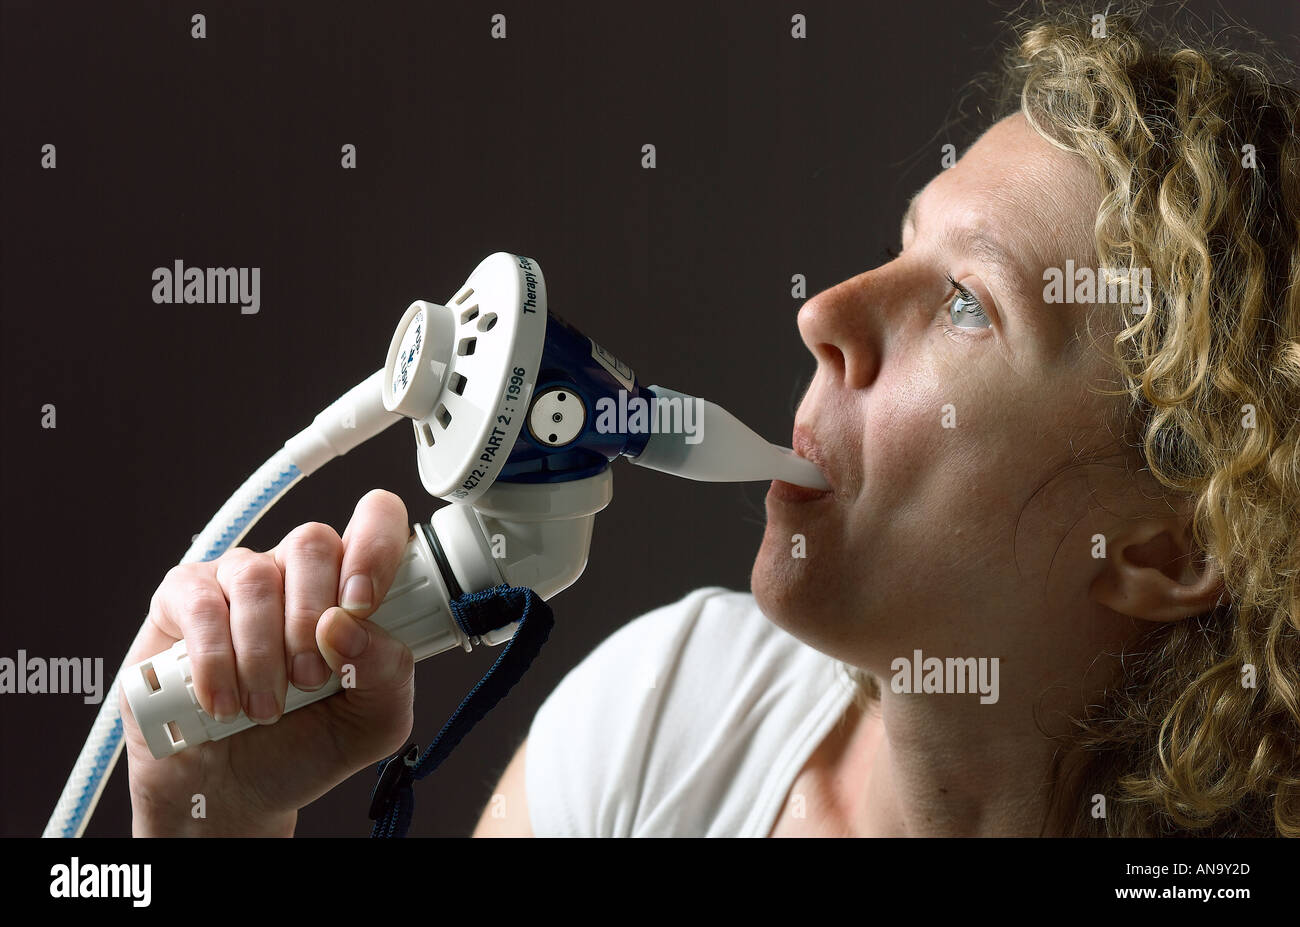 young woman using gas and air for pain relief Stock Photo